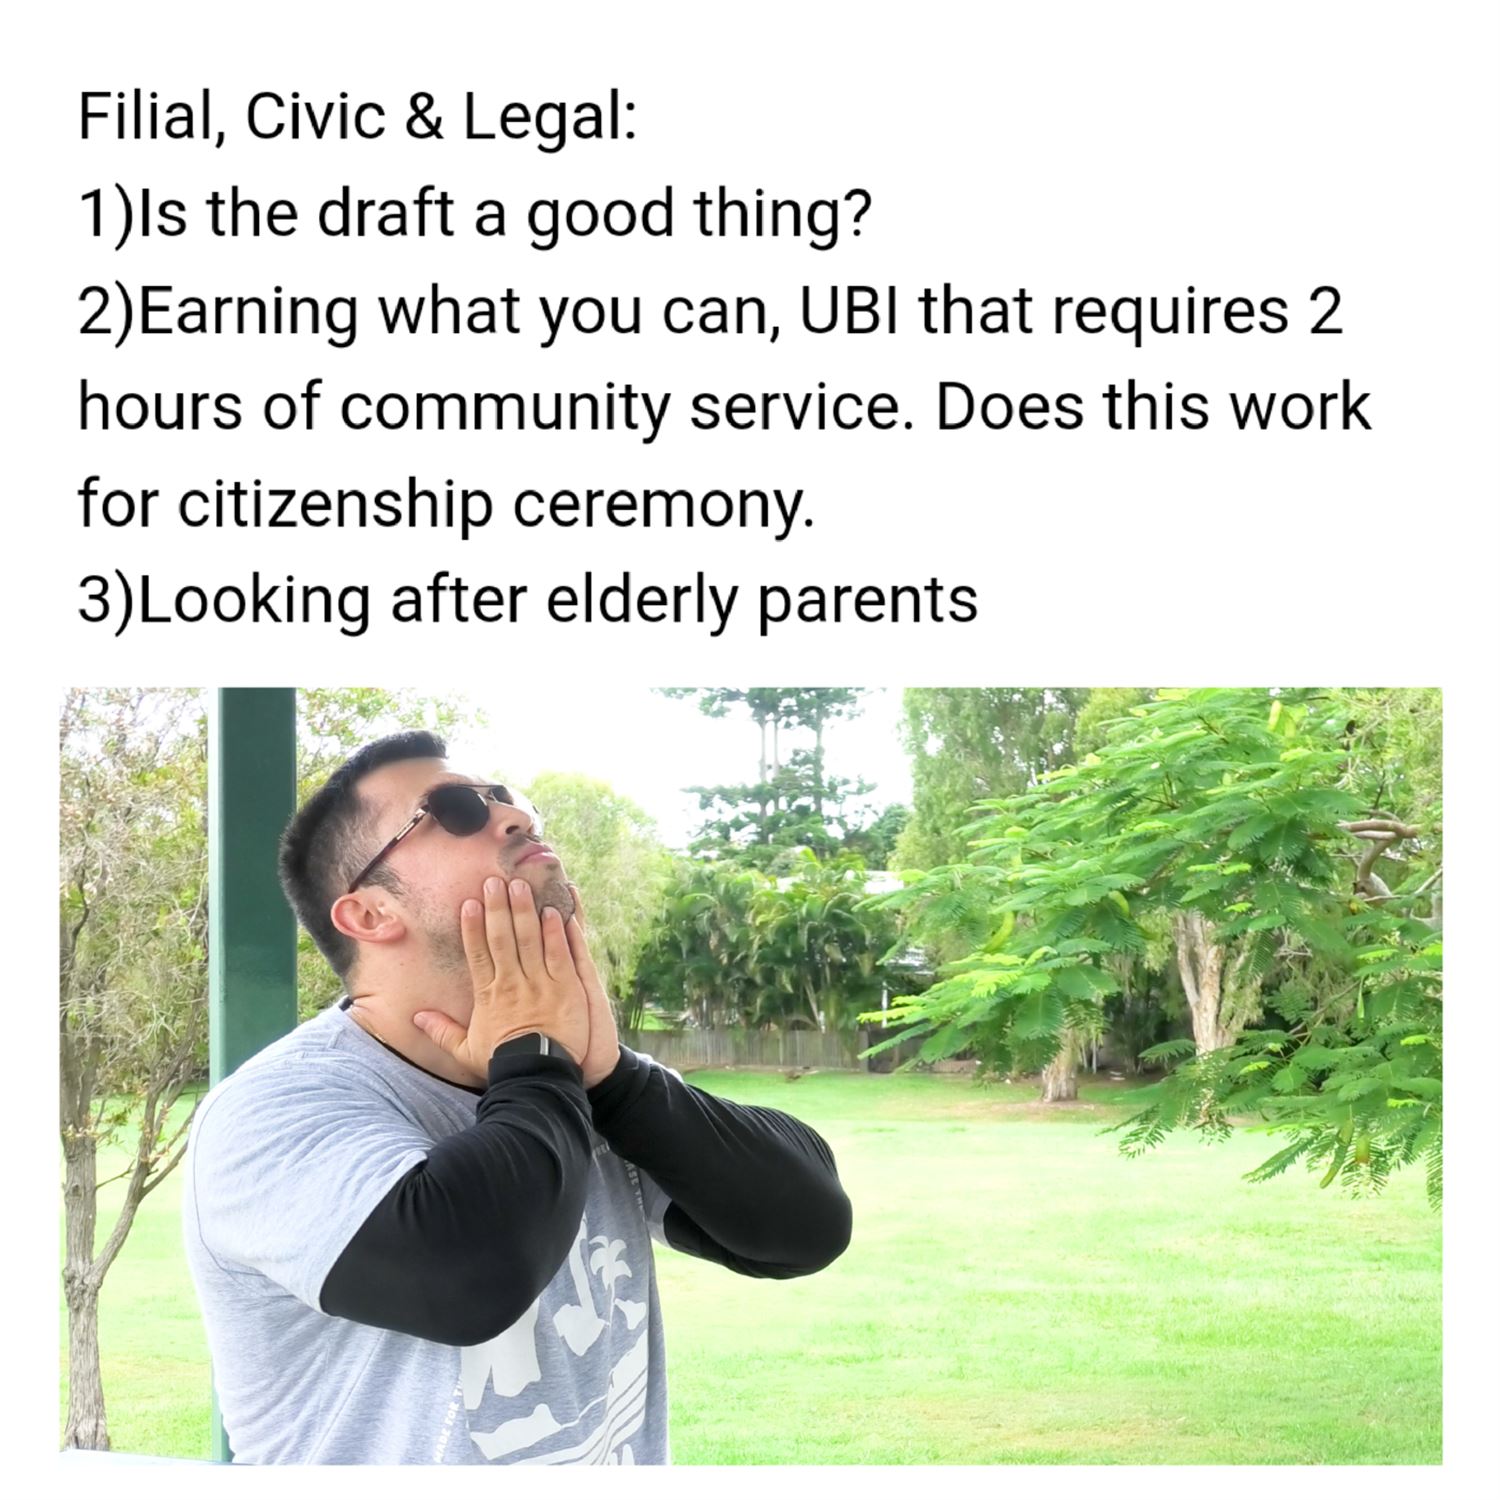 Filial: what do you owe your parents/family?